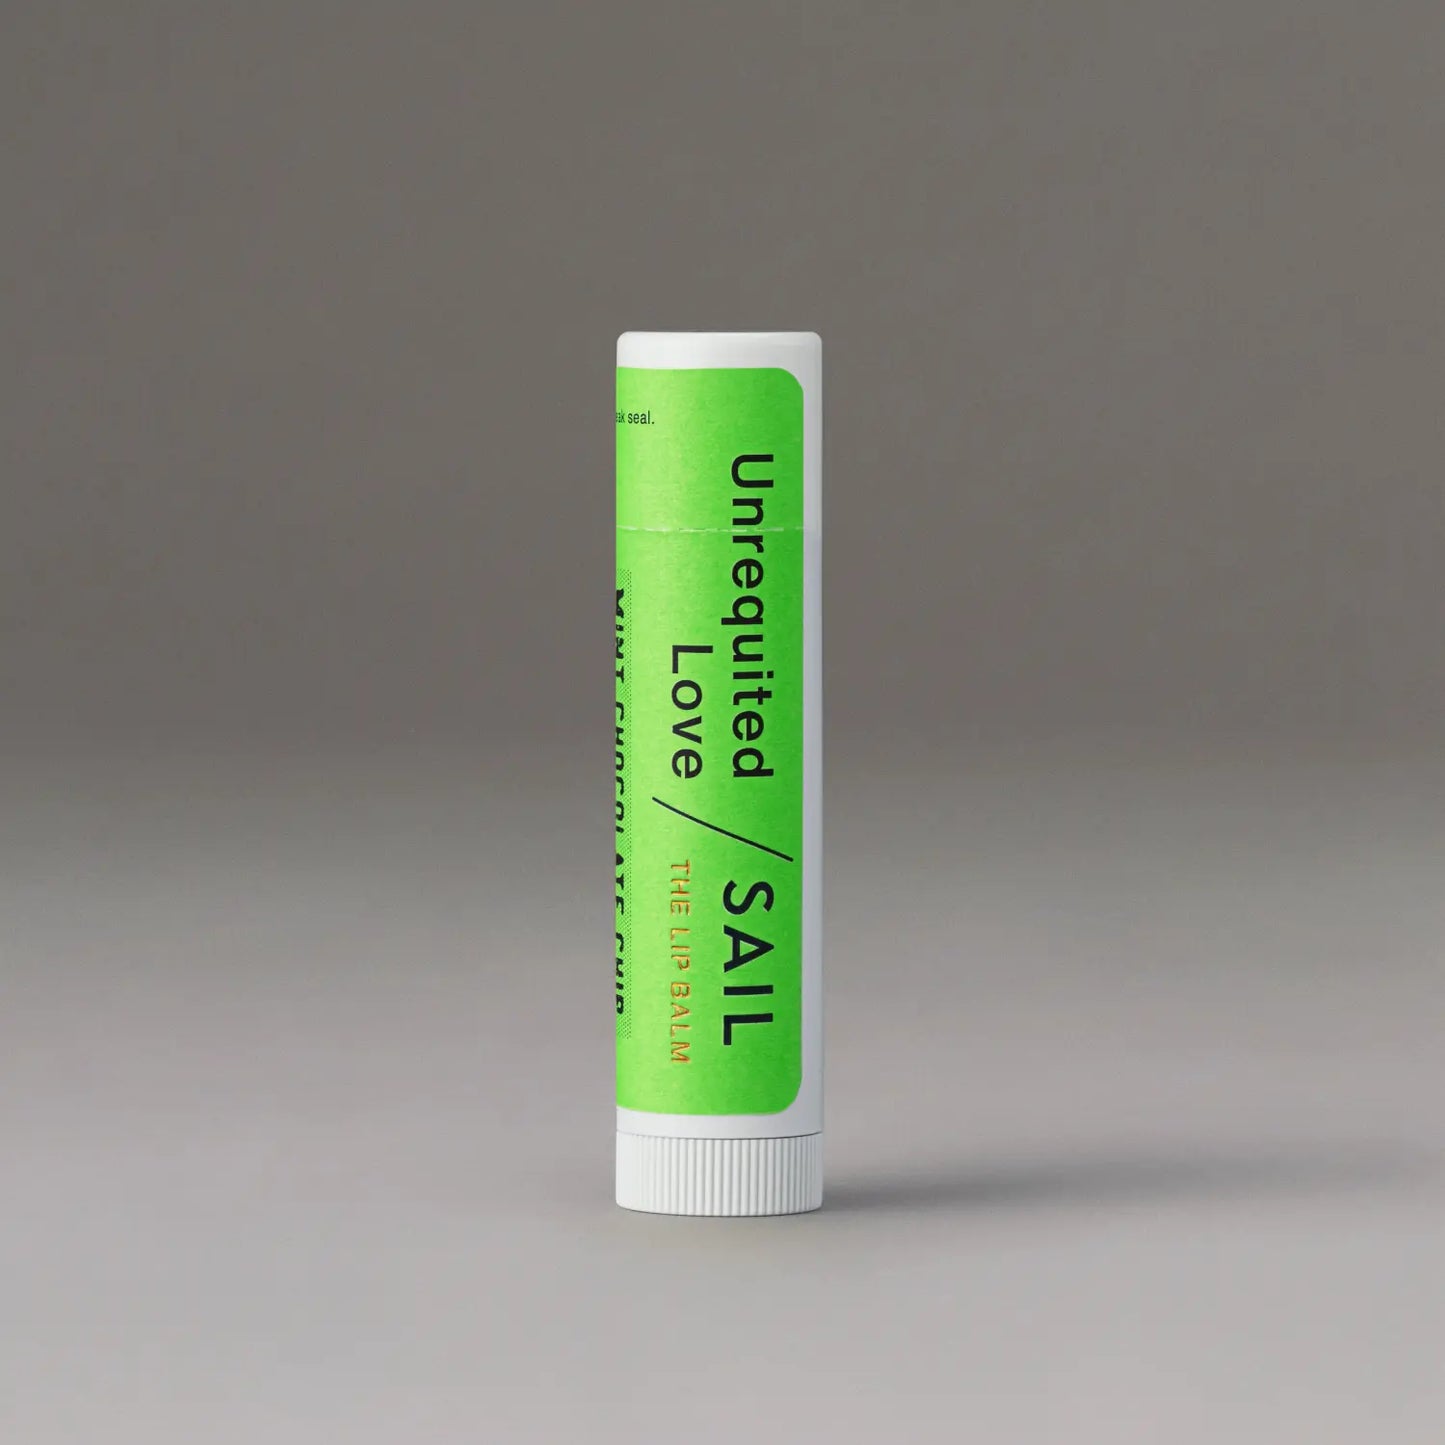 THE LIP BALM Unrequited Love / Mint Chocolate Chip "ORIGINAL PACKAGE" / 3.8g